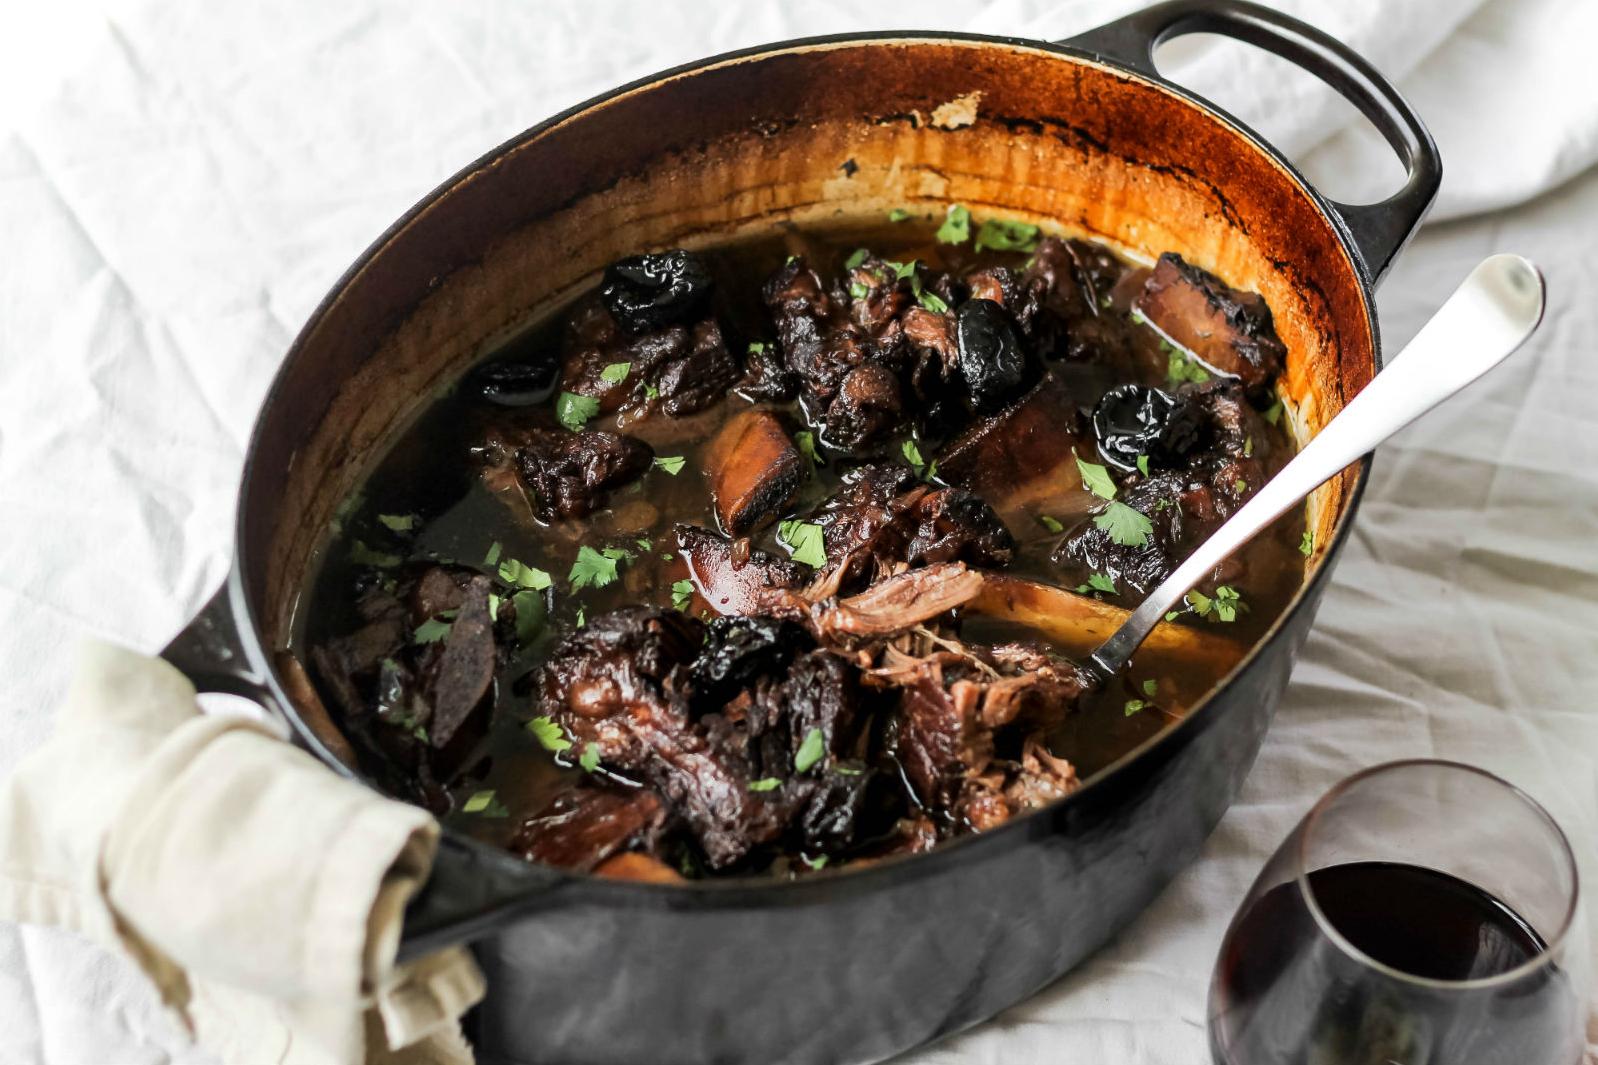  Tender short ribs cooked to perfection in a savory red wine and prune sauce